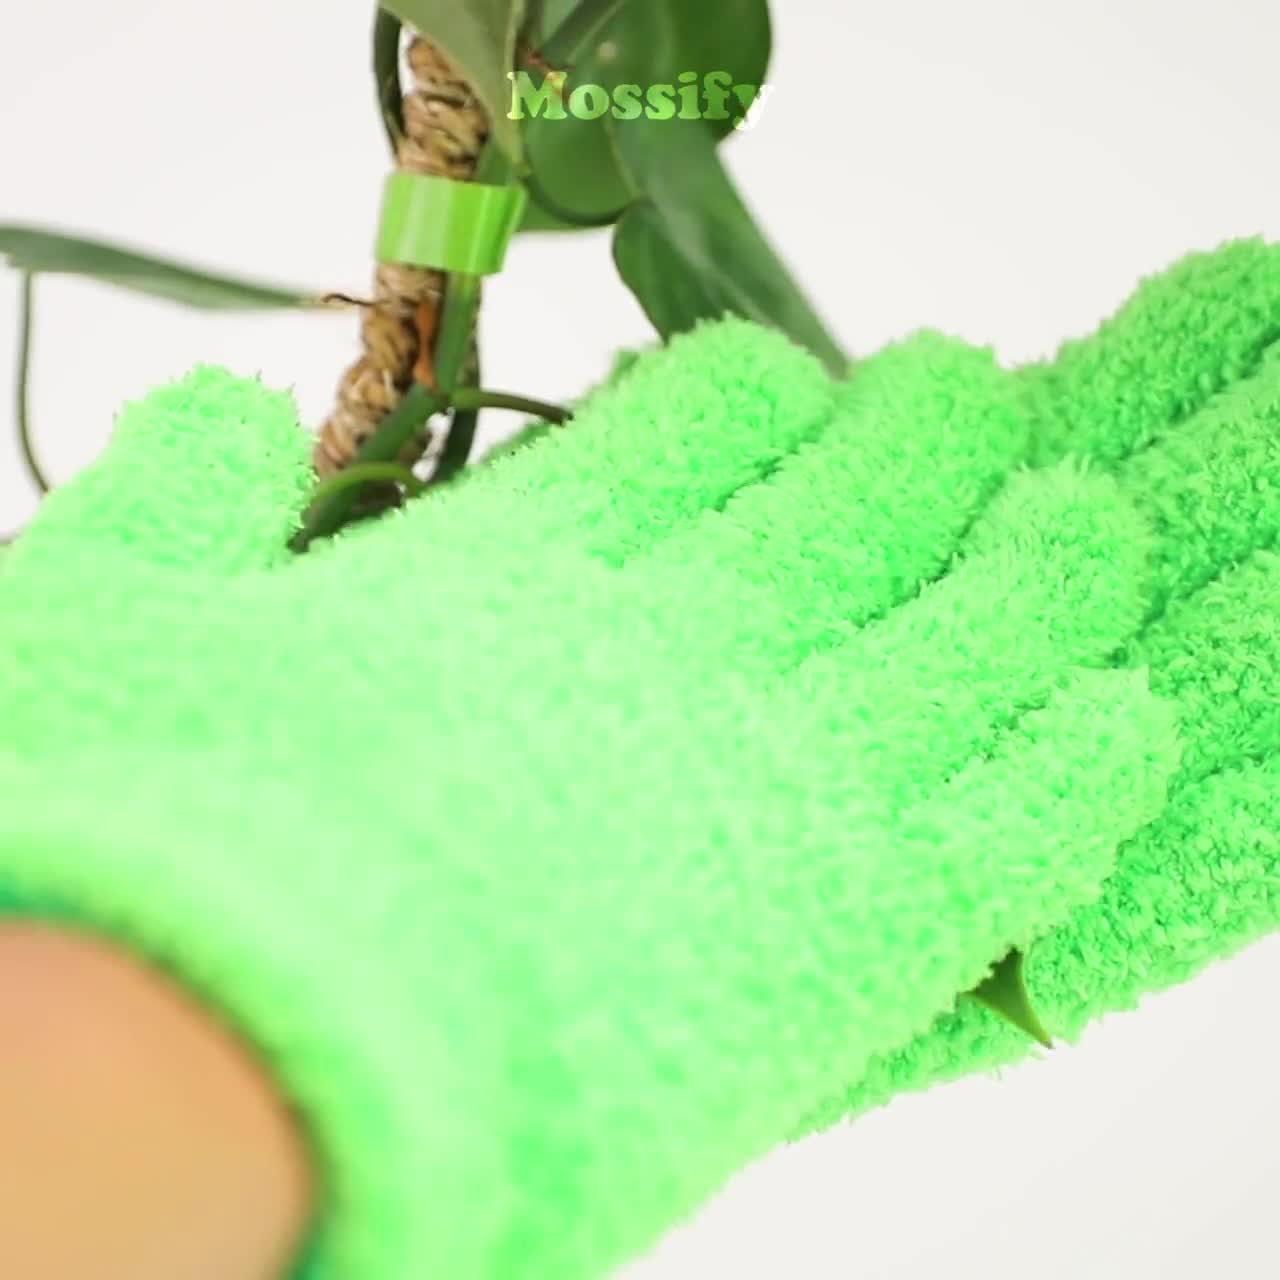  BLESS YOUR SOIL Microfiber Dusting Gloves for Plants : Premium,  Gentle, Traps Dust, Washable, Lint Free : Use with Big Leaf Energy  ready-to-use spray for houseplants : Health & Household